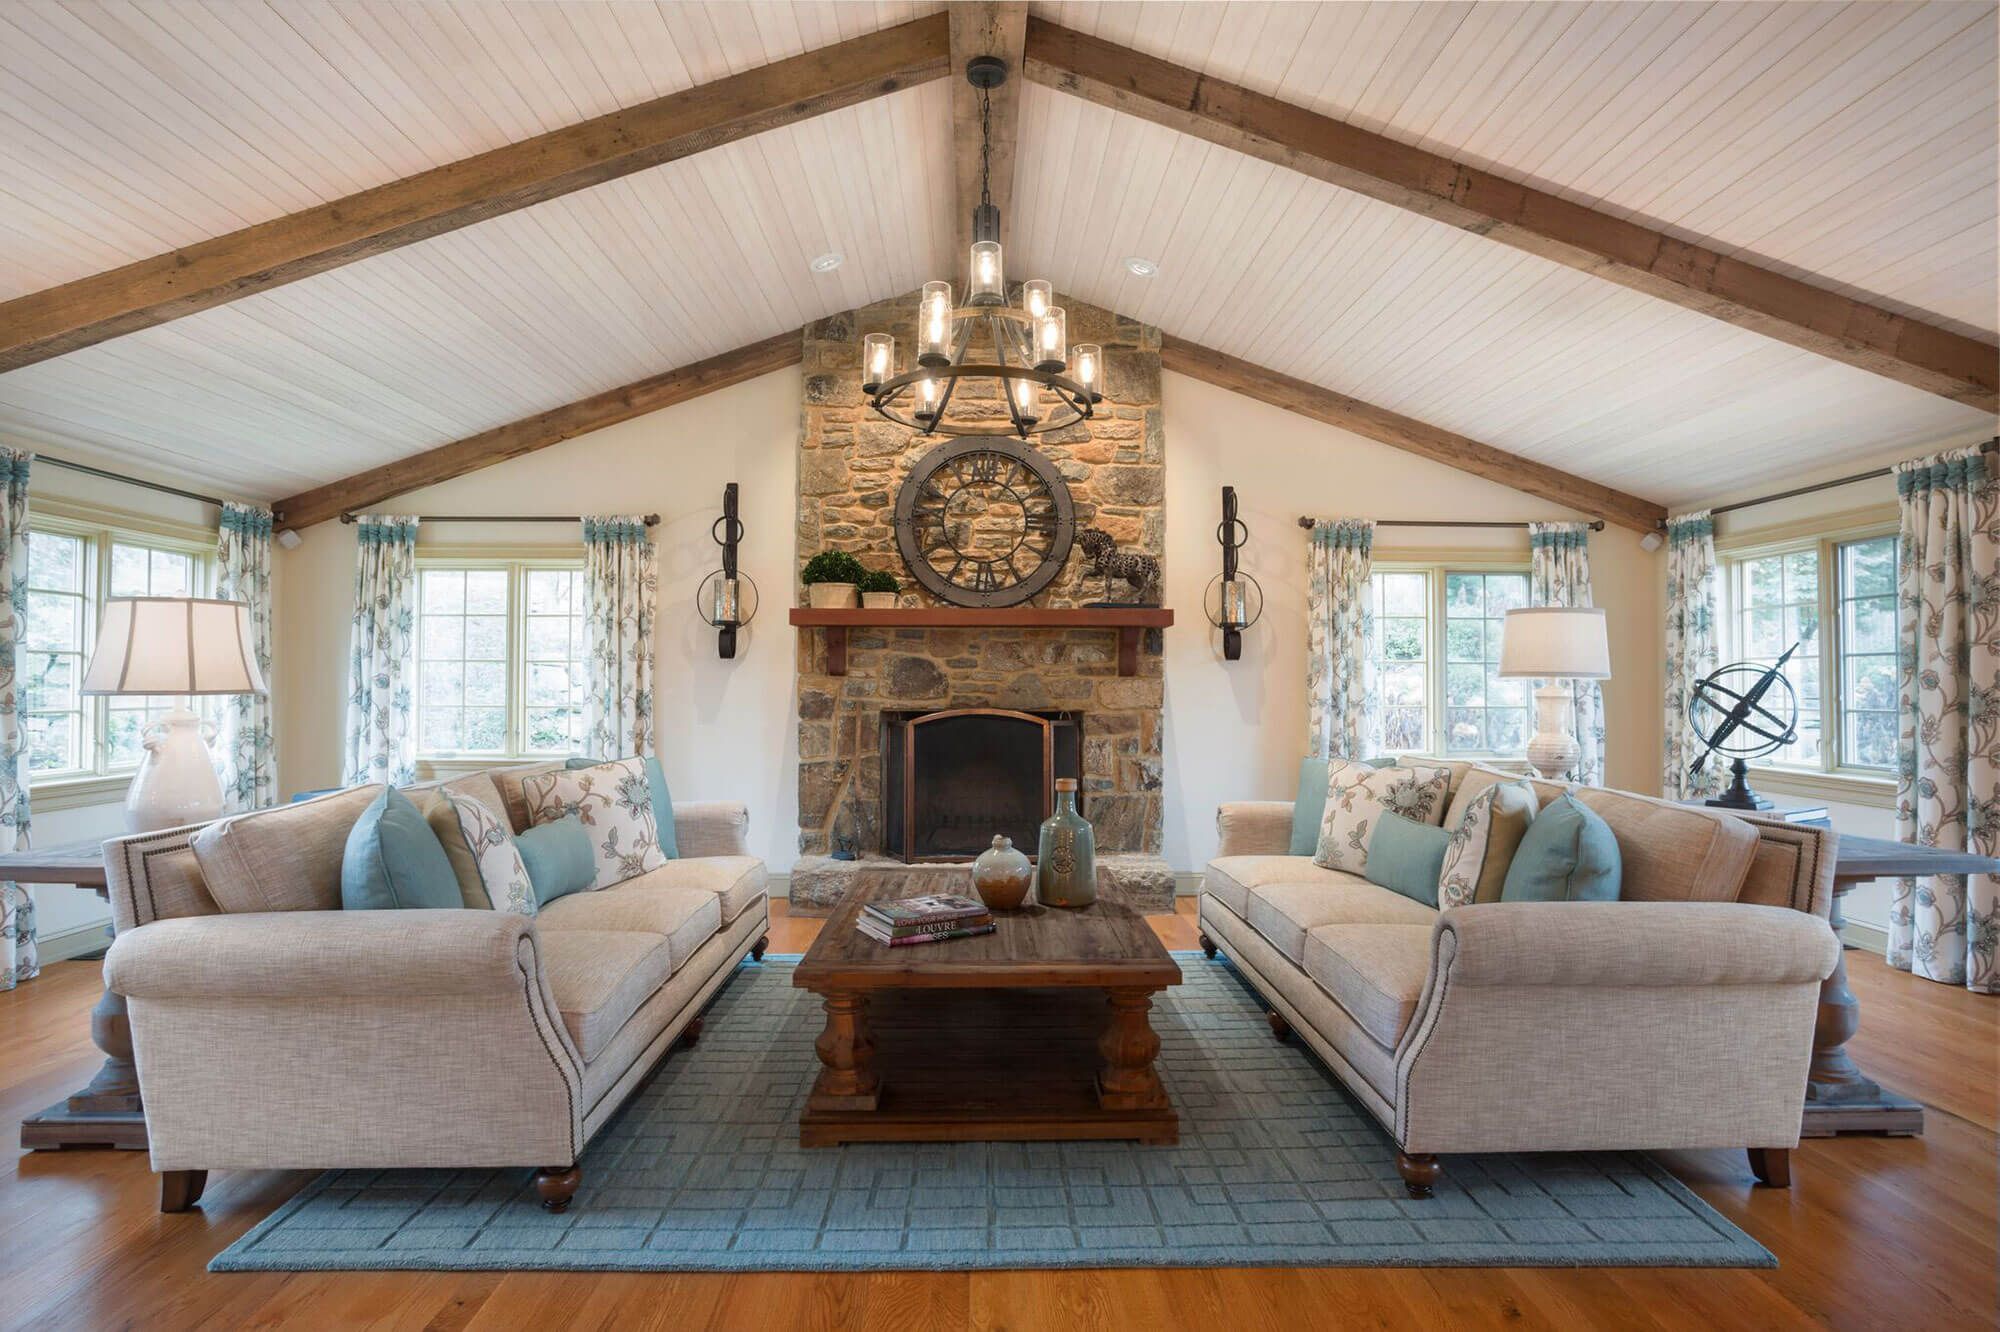 A room with sloped ceiling, fireplace made of textured brick, wooden center table, and couch